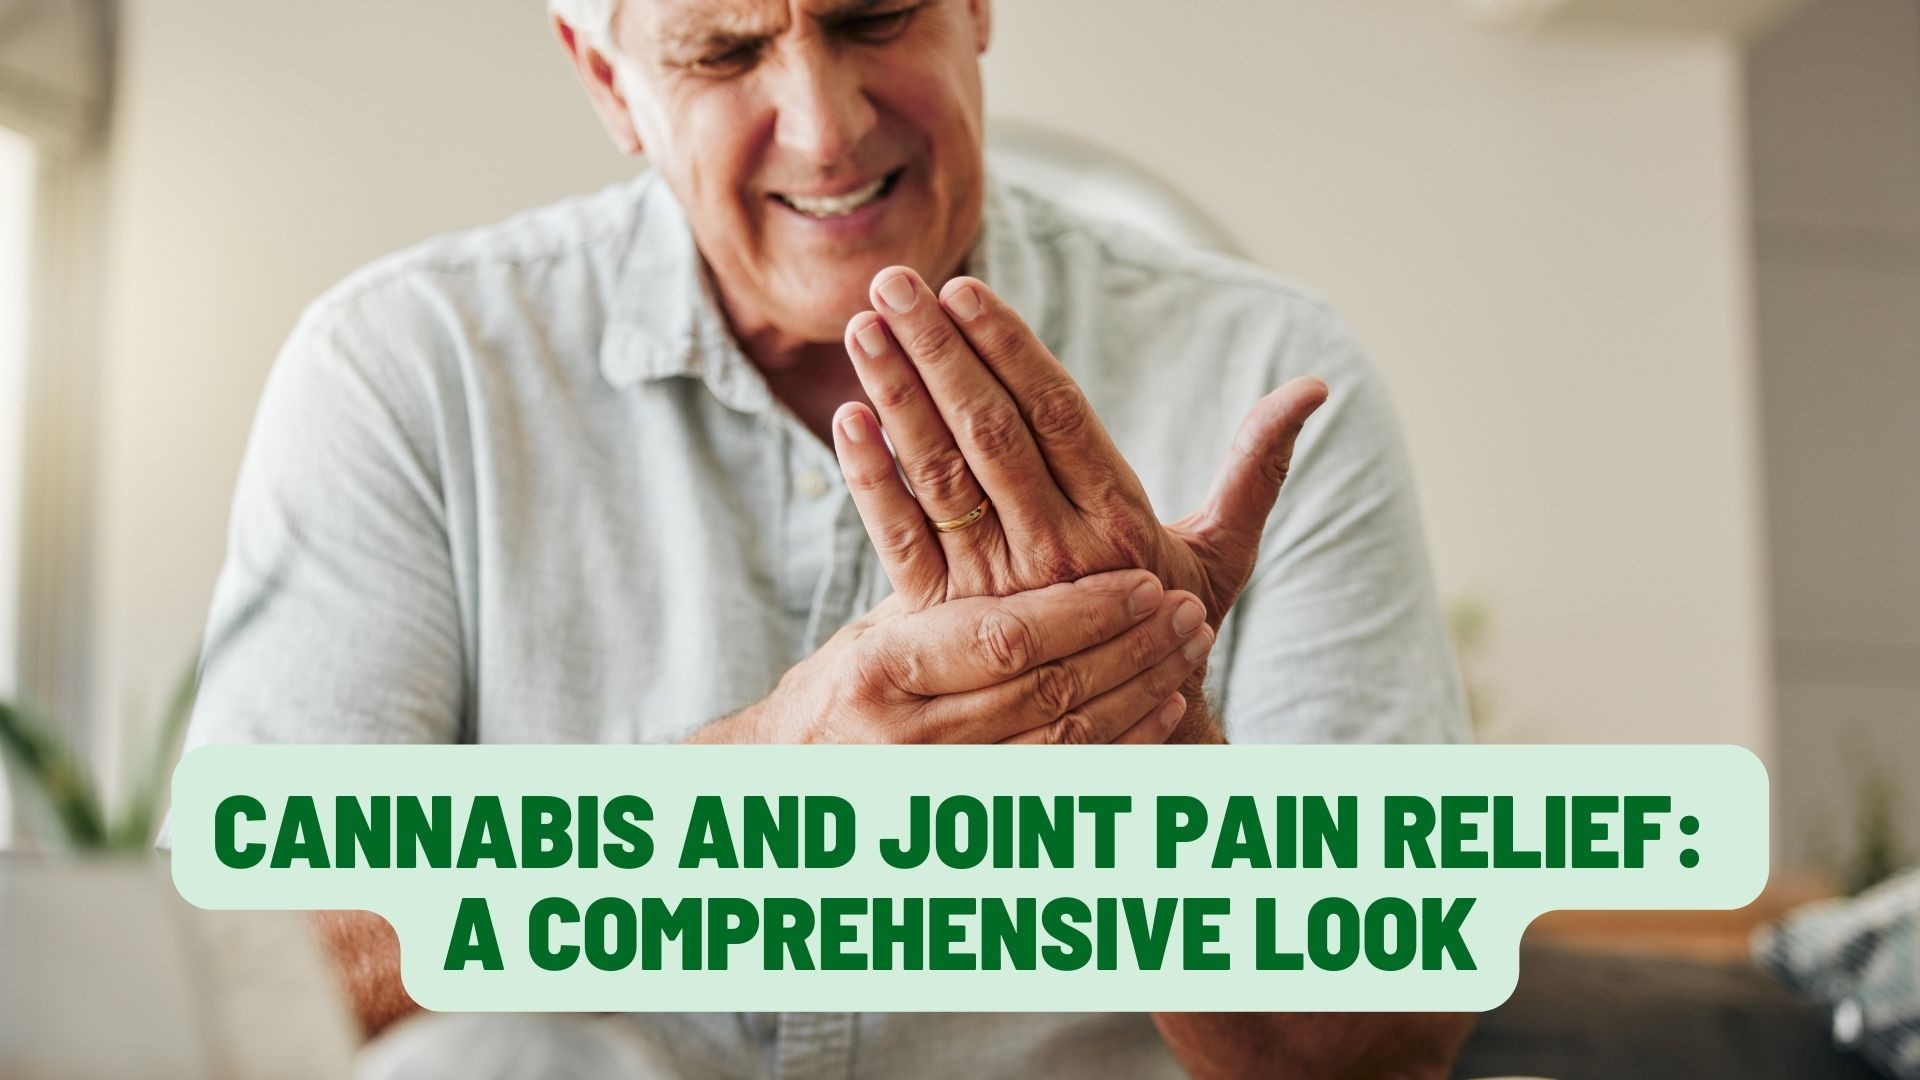 Cannabis and Joint Pain Relief: A Comprehensive Look